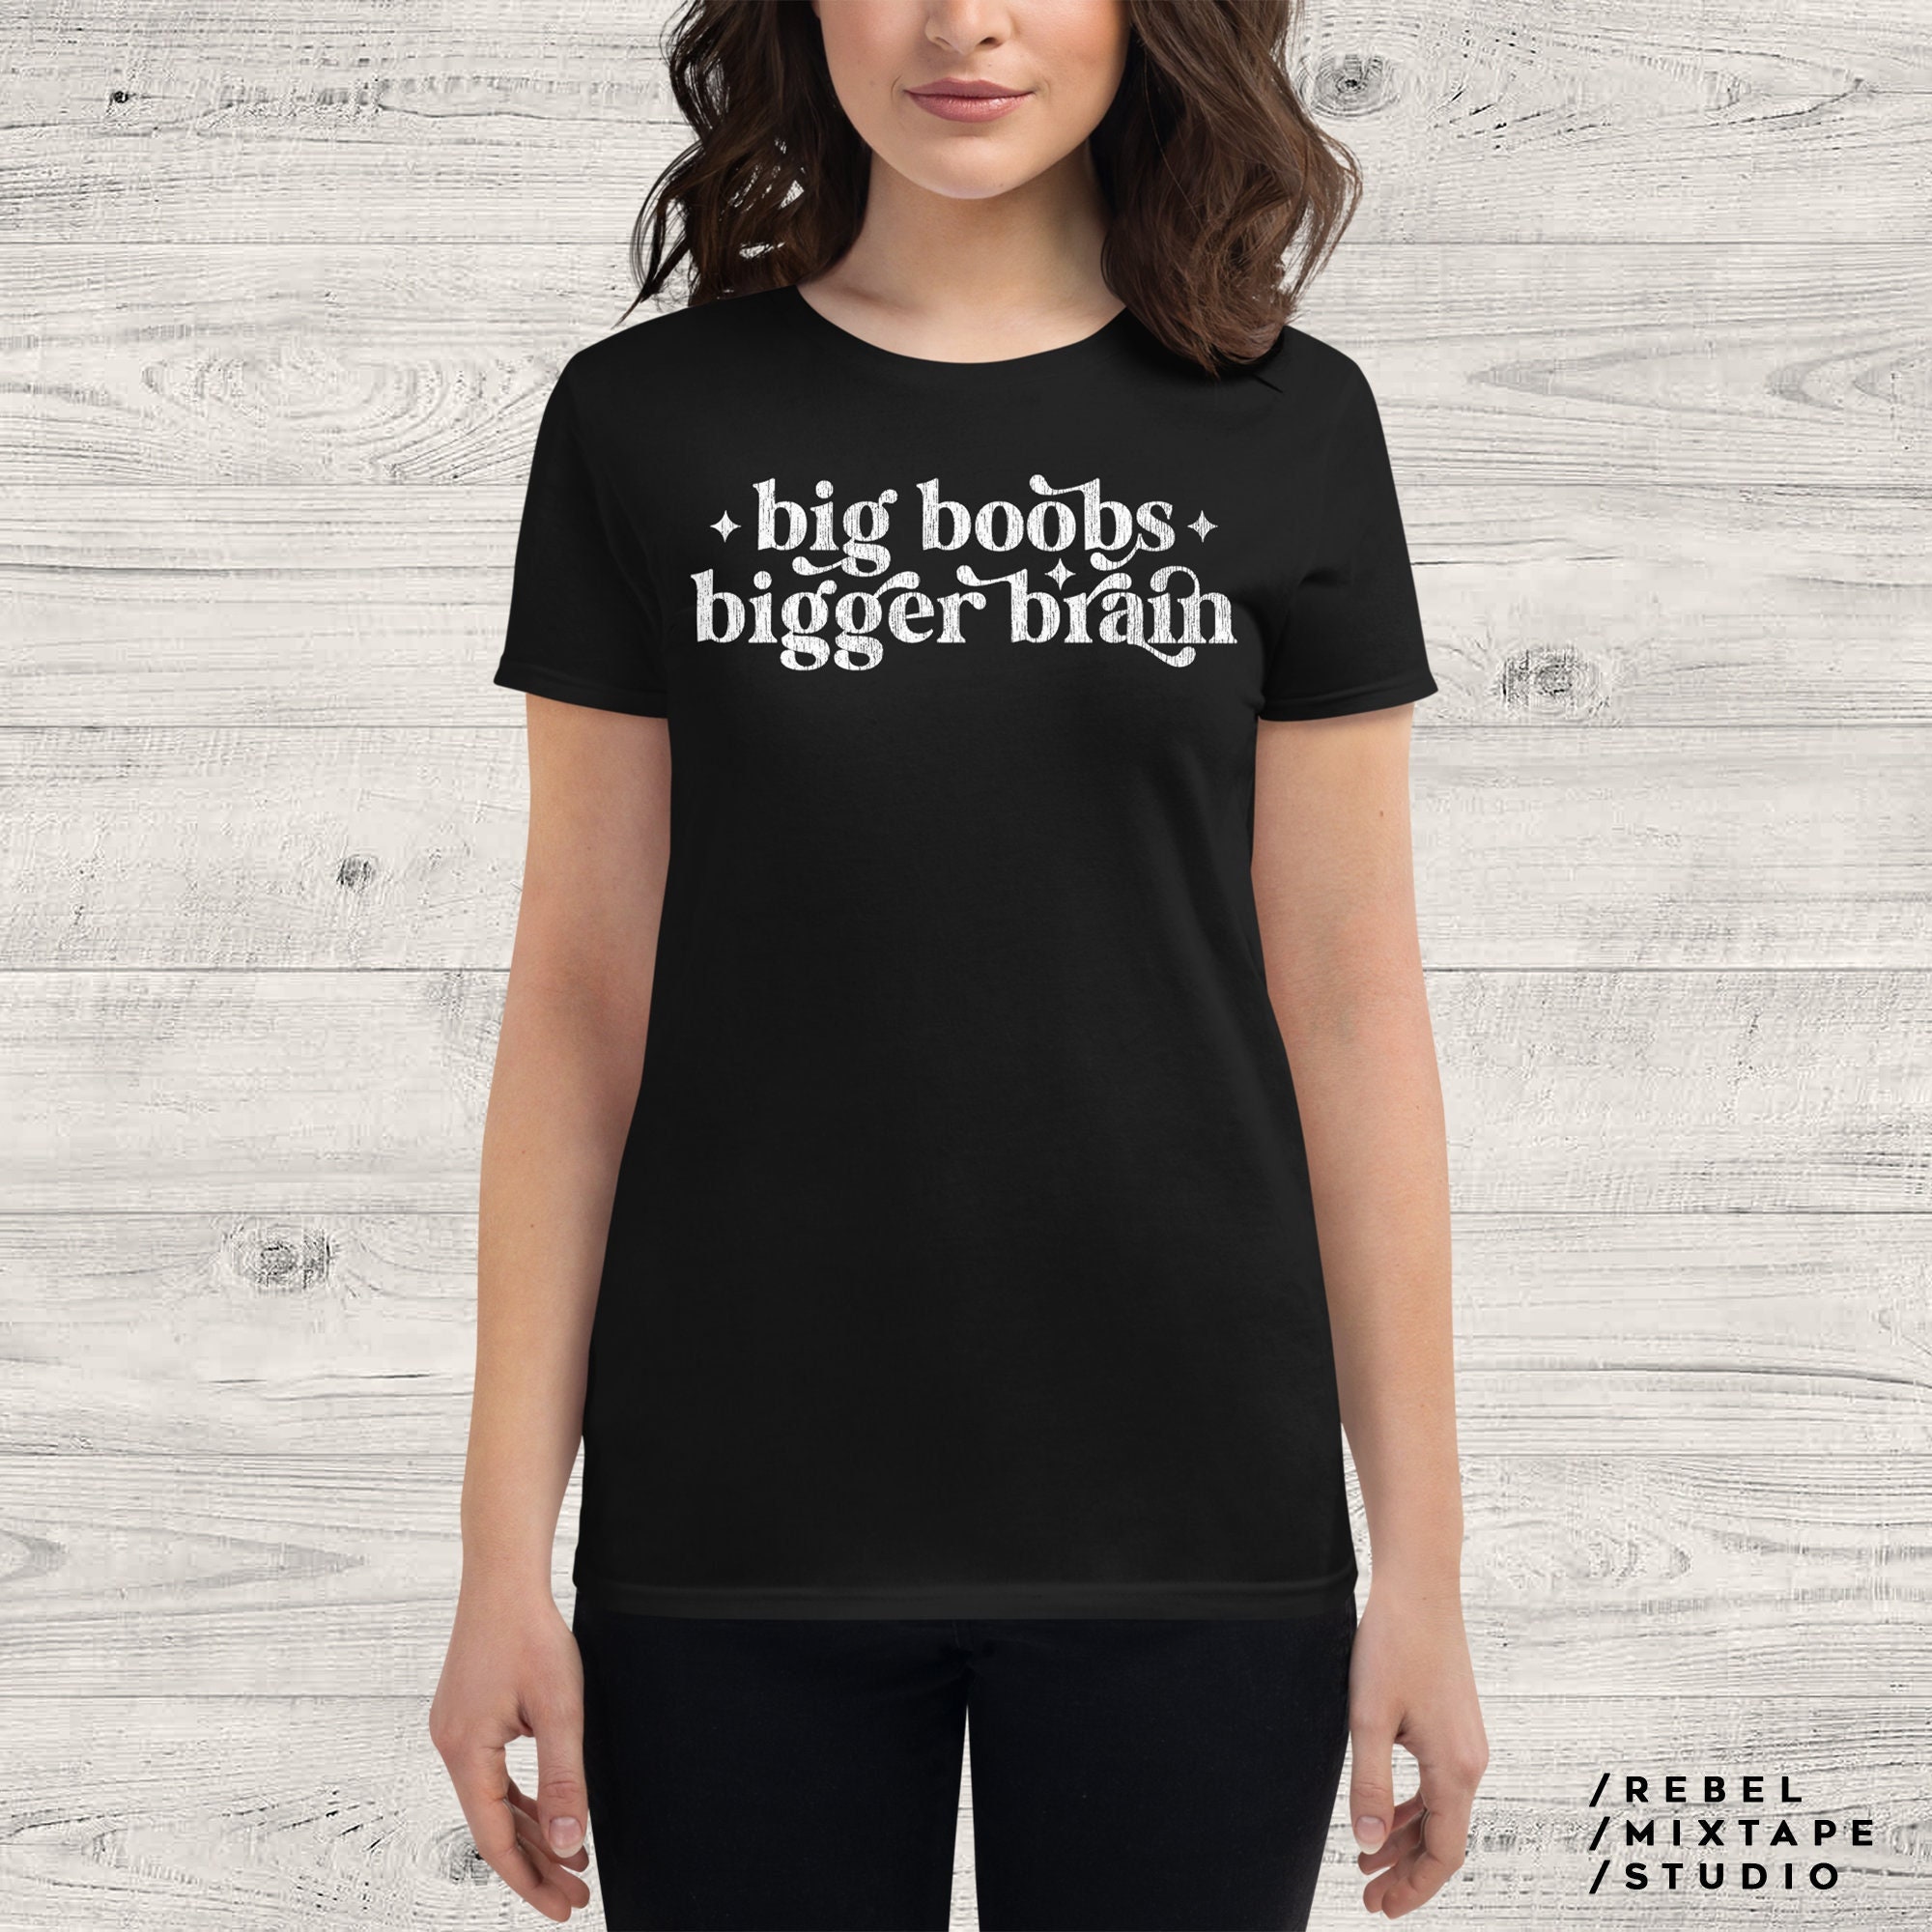 Big Boobs Bigger Brain Women's Fit T-shirt Cute Aesthetic Smart Girl Gift,  Funny Body Positive / Sex Positive Clothing, Busty Woman Humor 